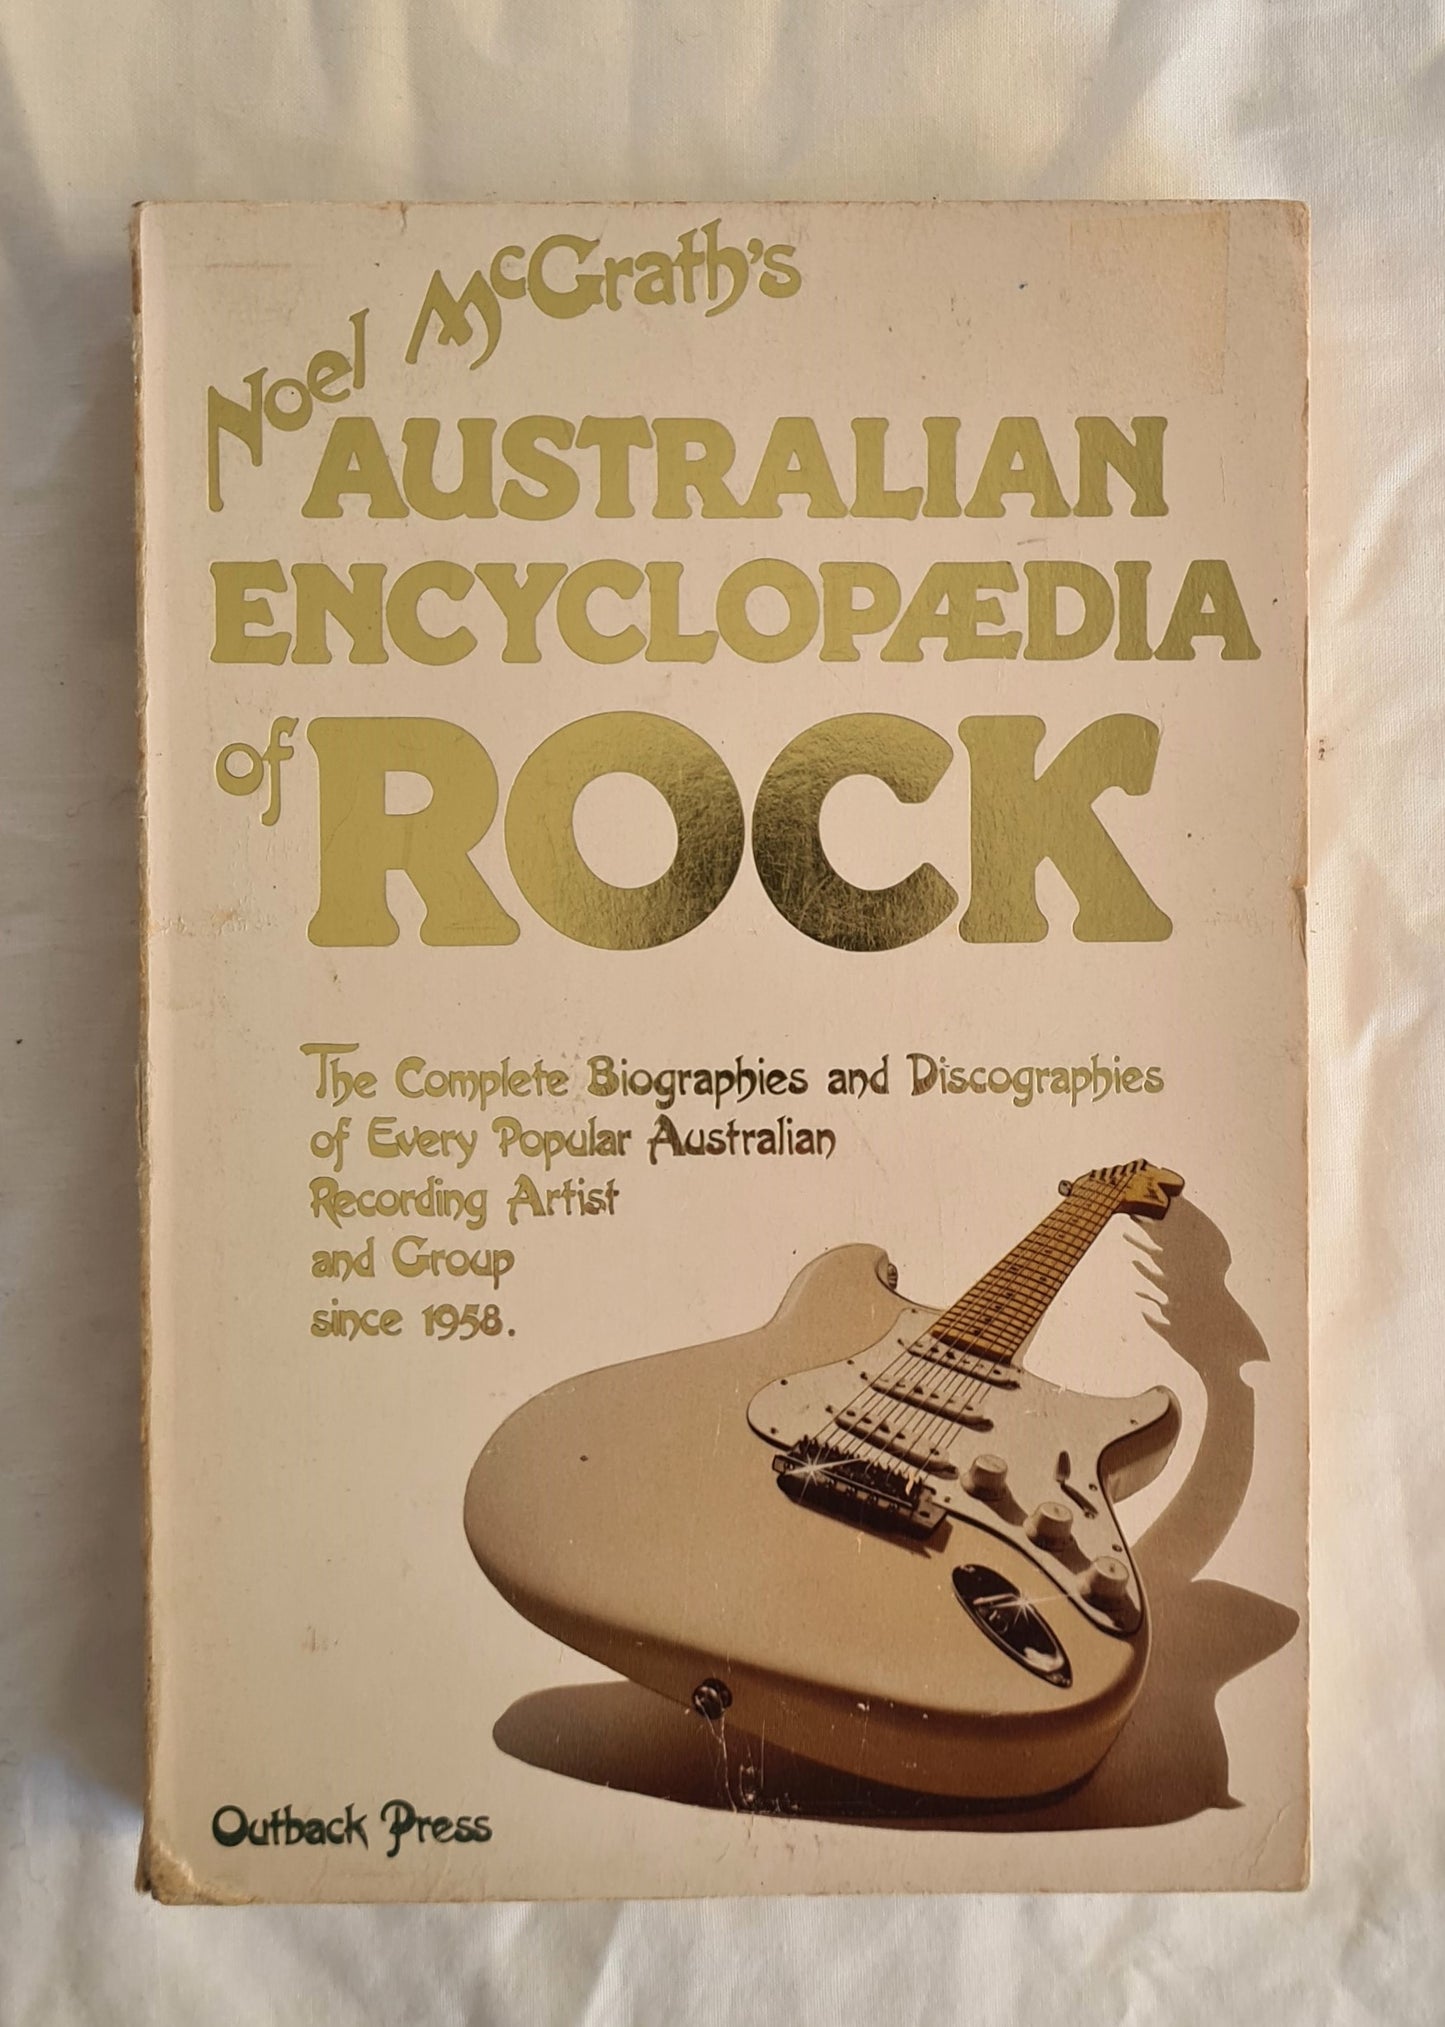 Noel McGrath’s Australian Encyclopaedia of Rock  The Complete Biographies and Discographies of Every Popular Australian Recording Artist and Group since 1958  by Noel McGrath